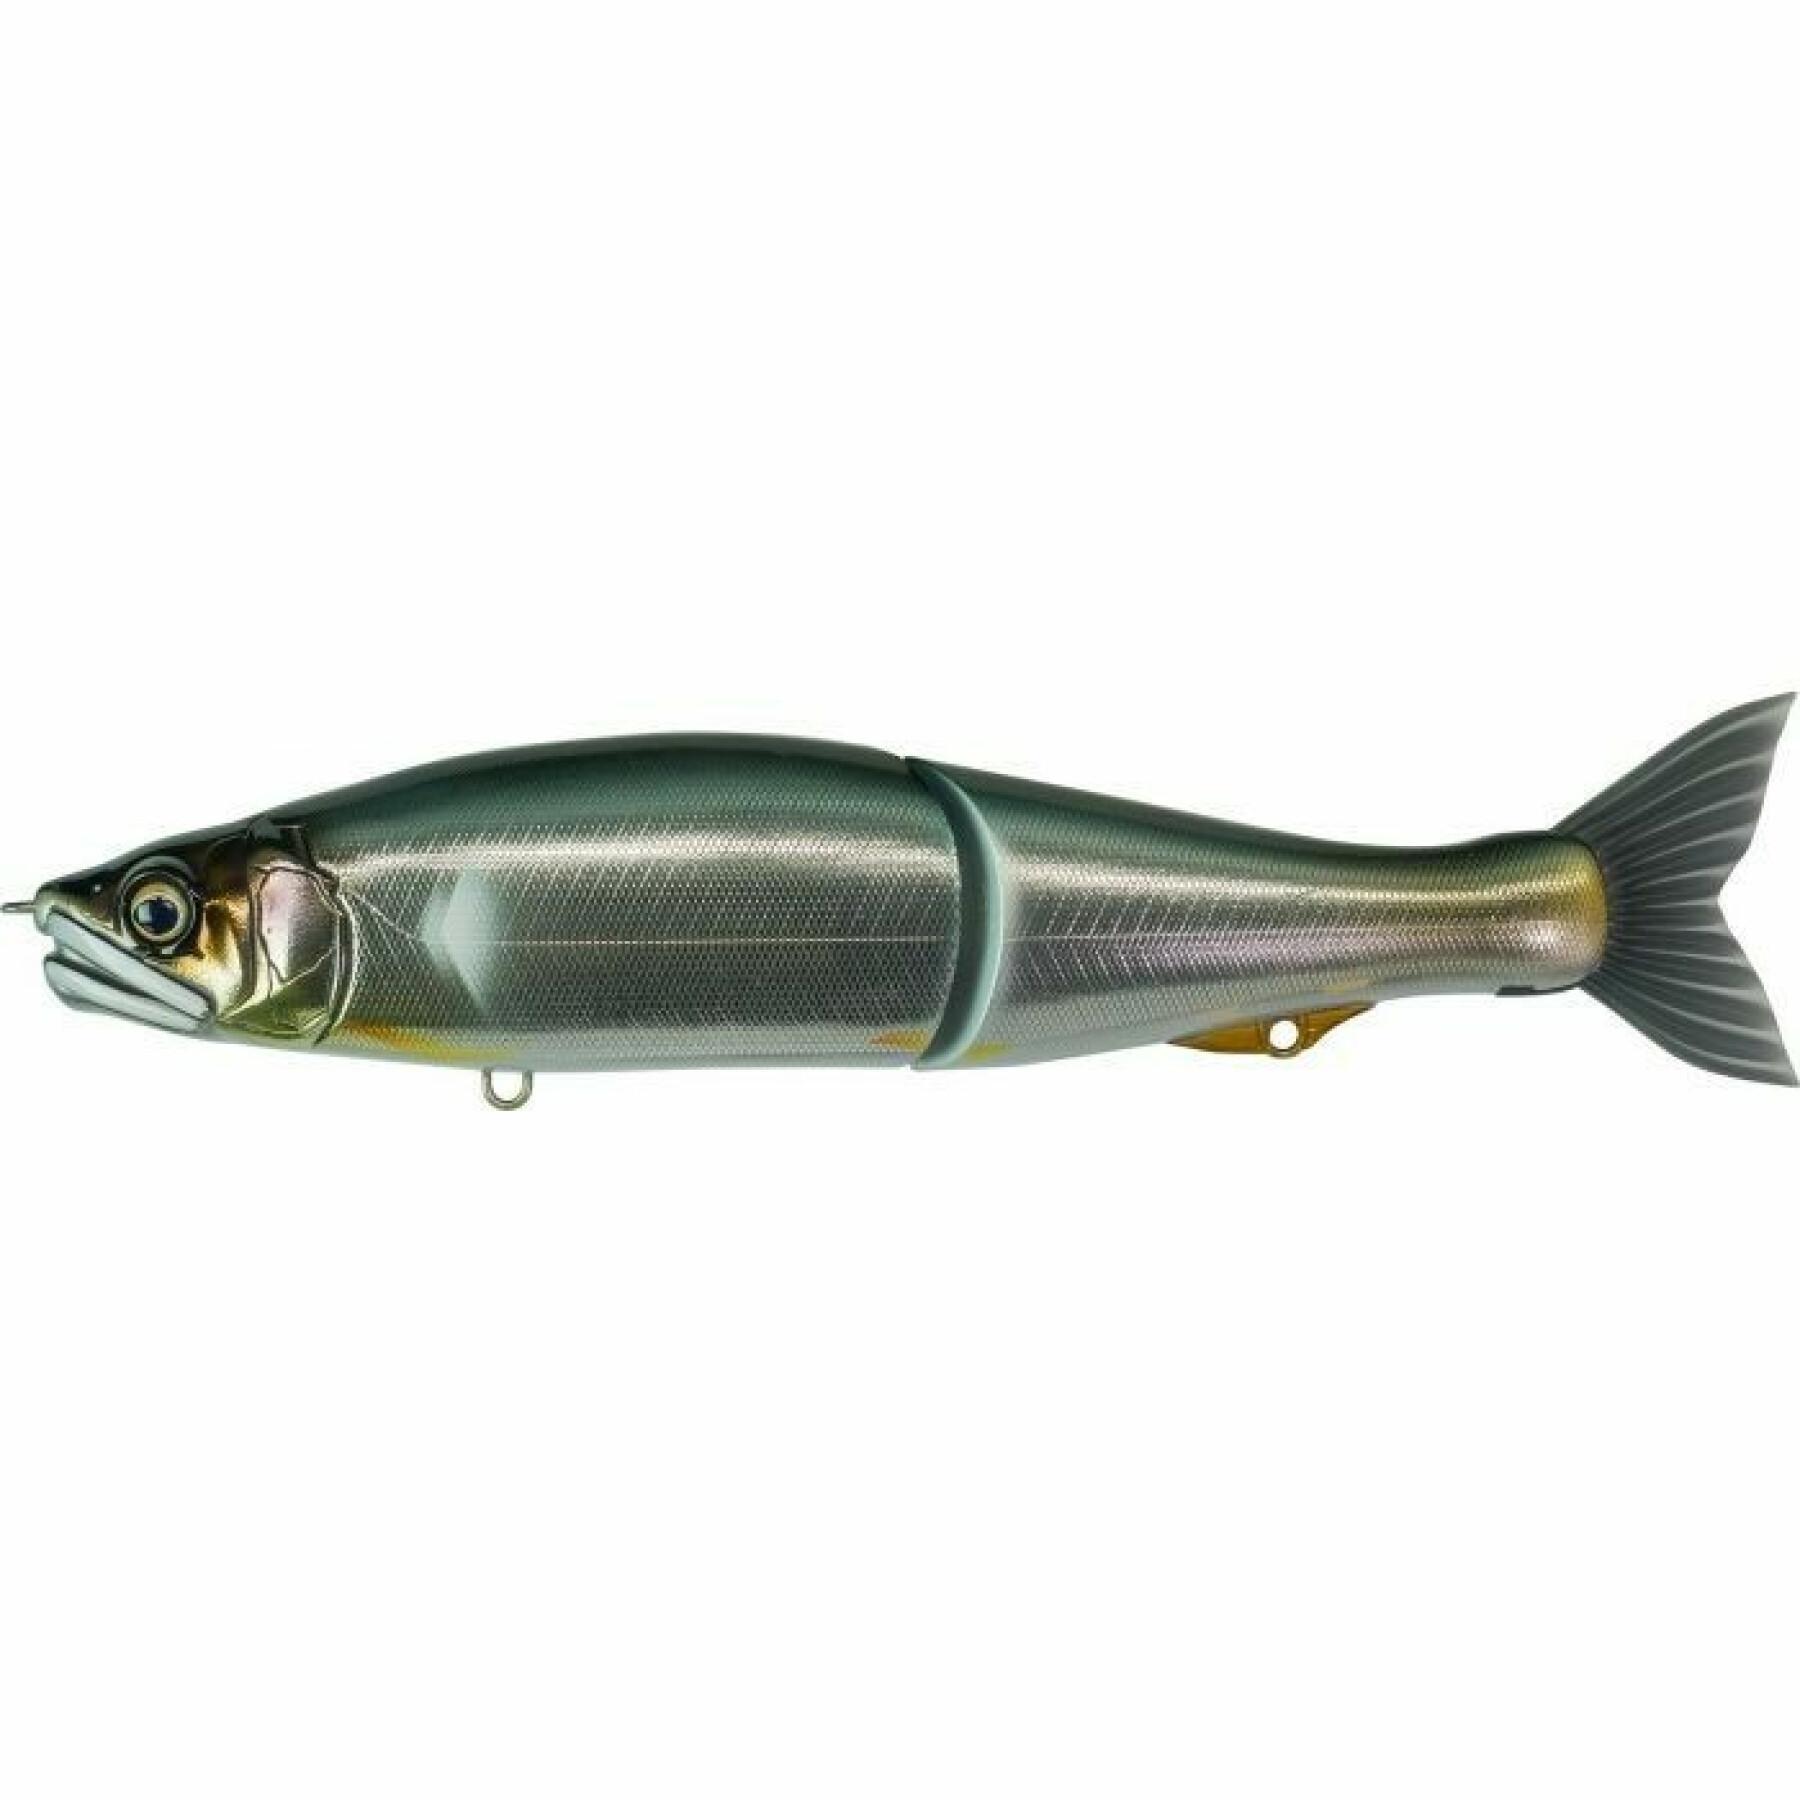 Gan craft jointed claw r shaku one lure - 260 g